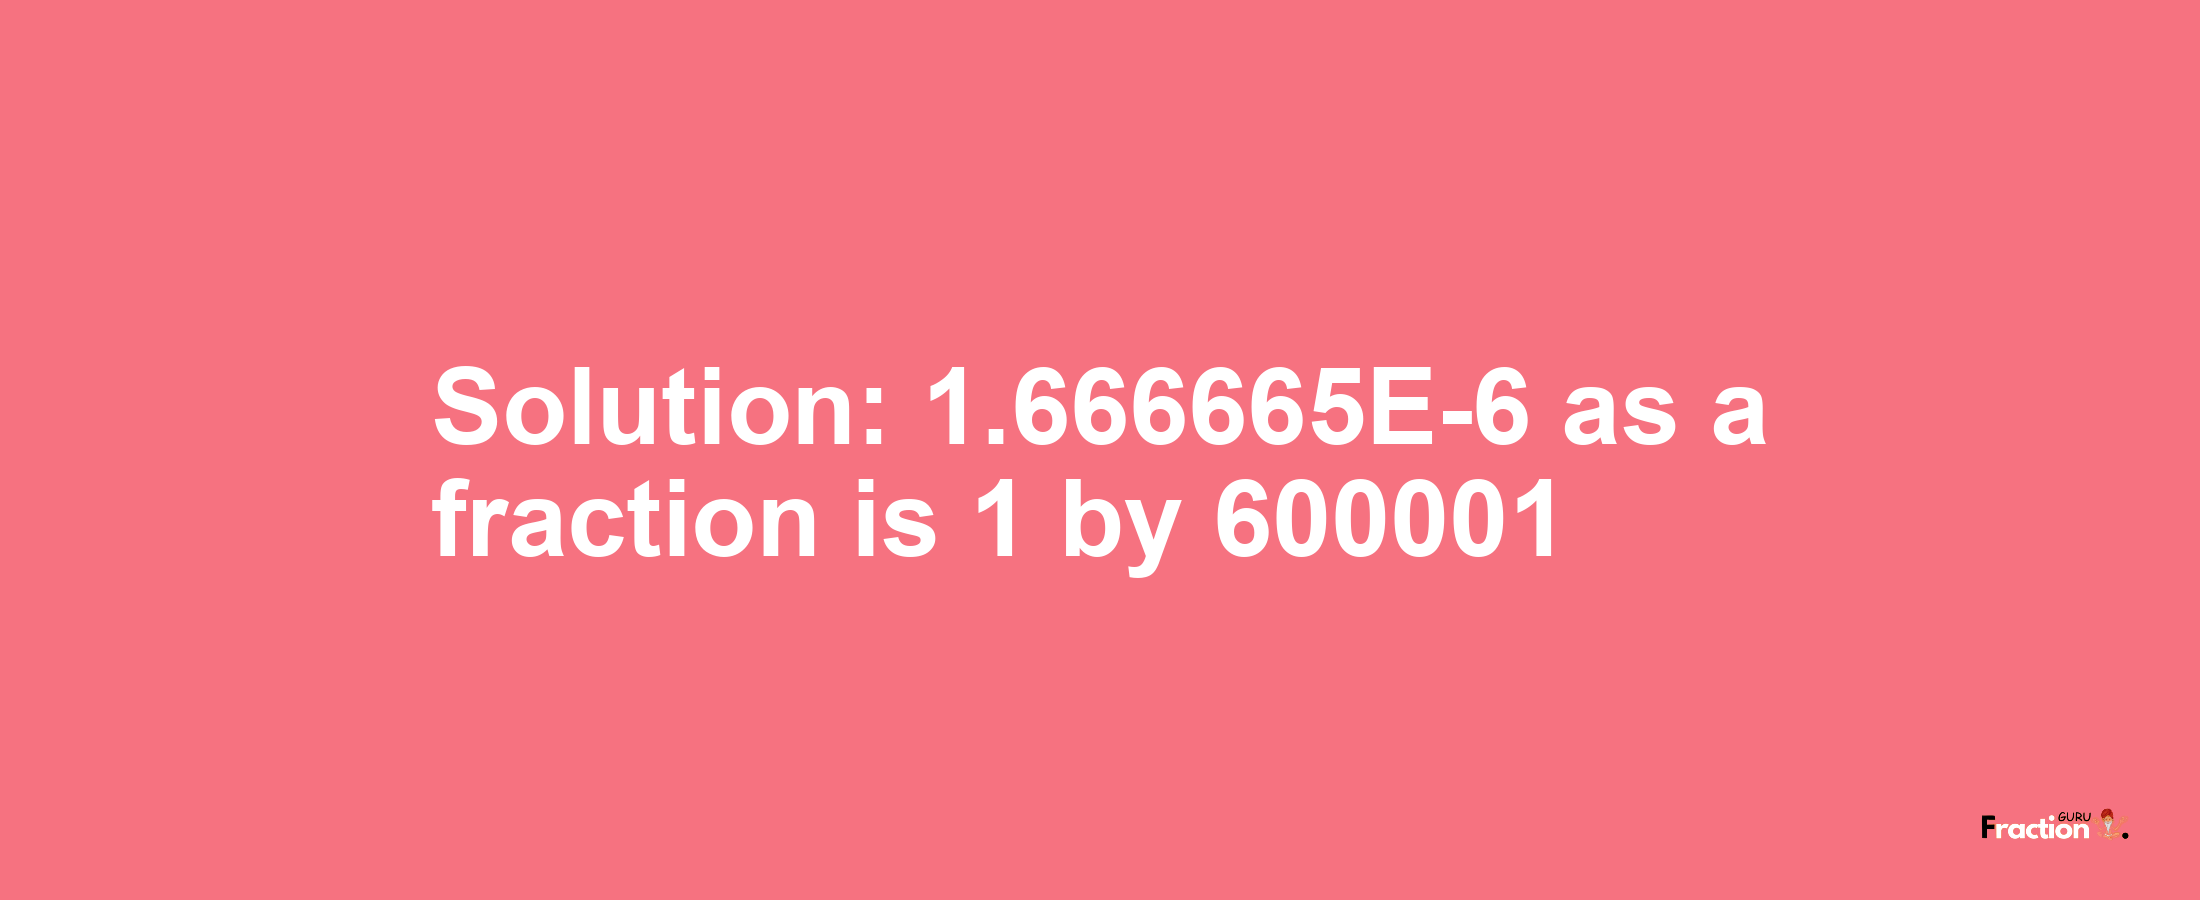 Solution:1.666665E-6 as a fraction is 1/600001